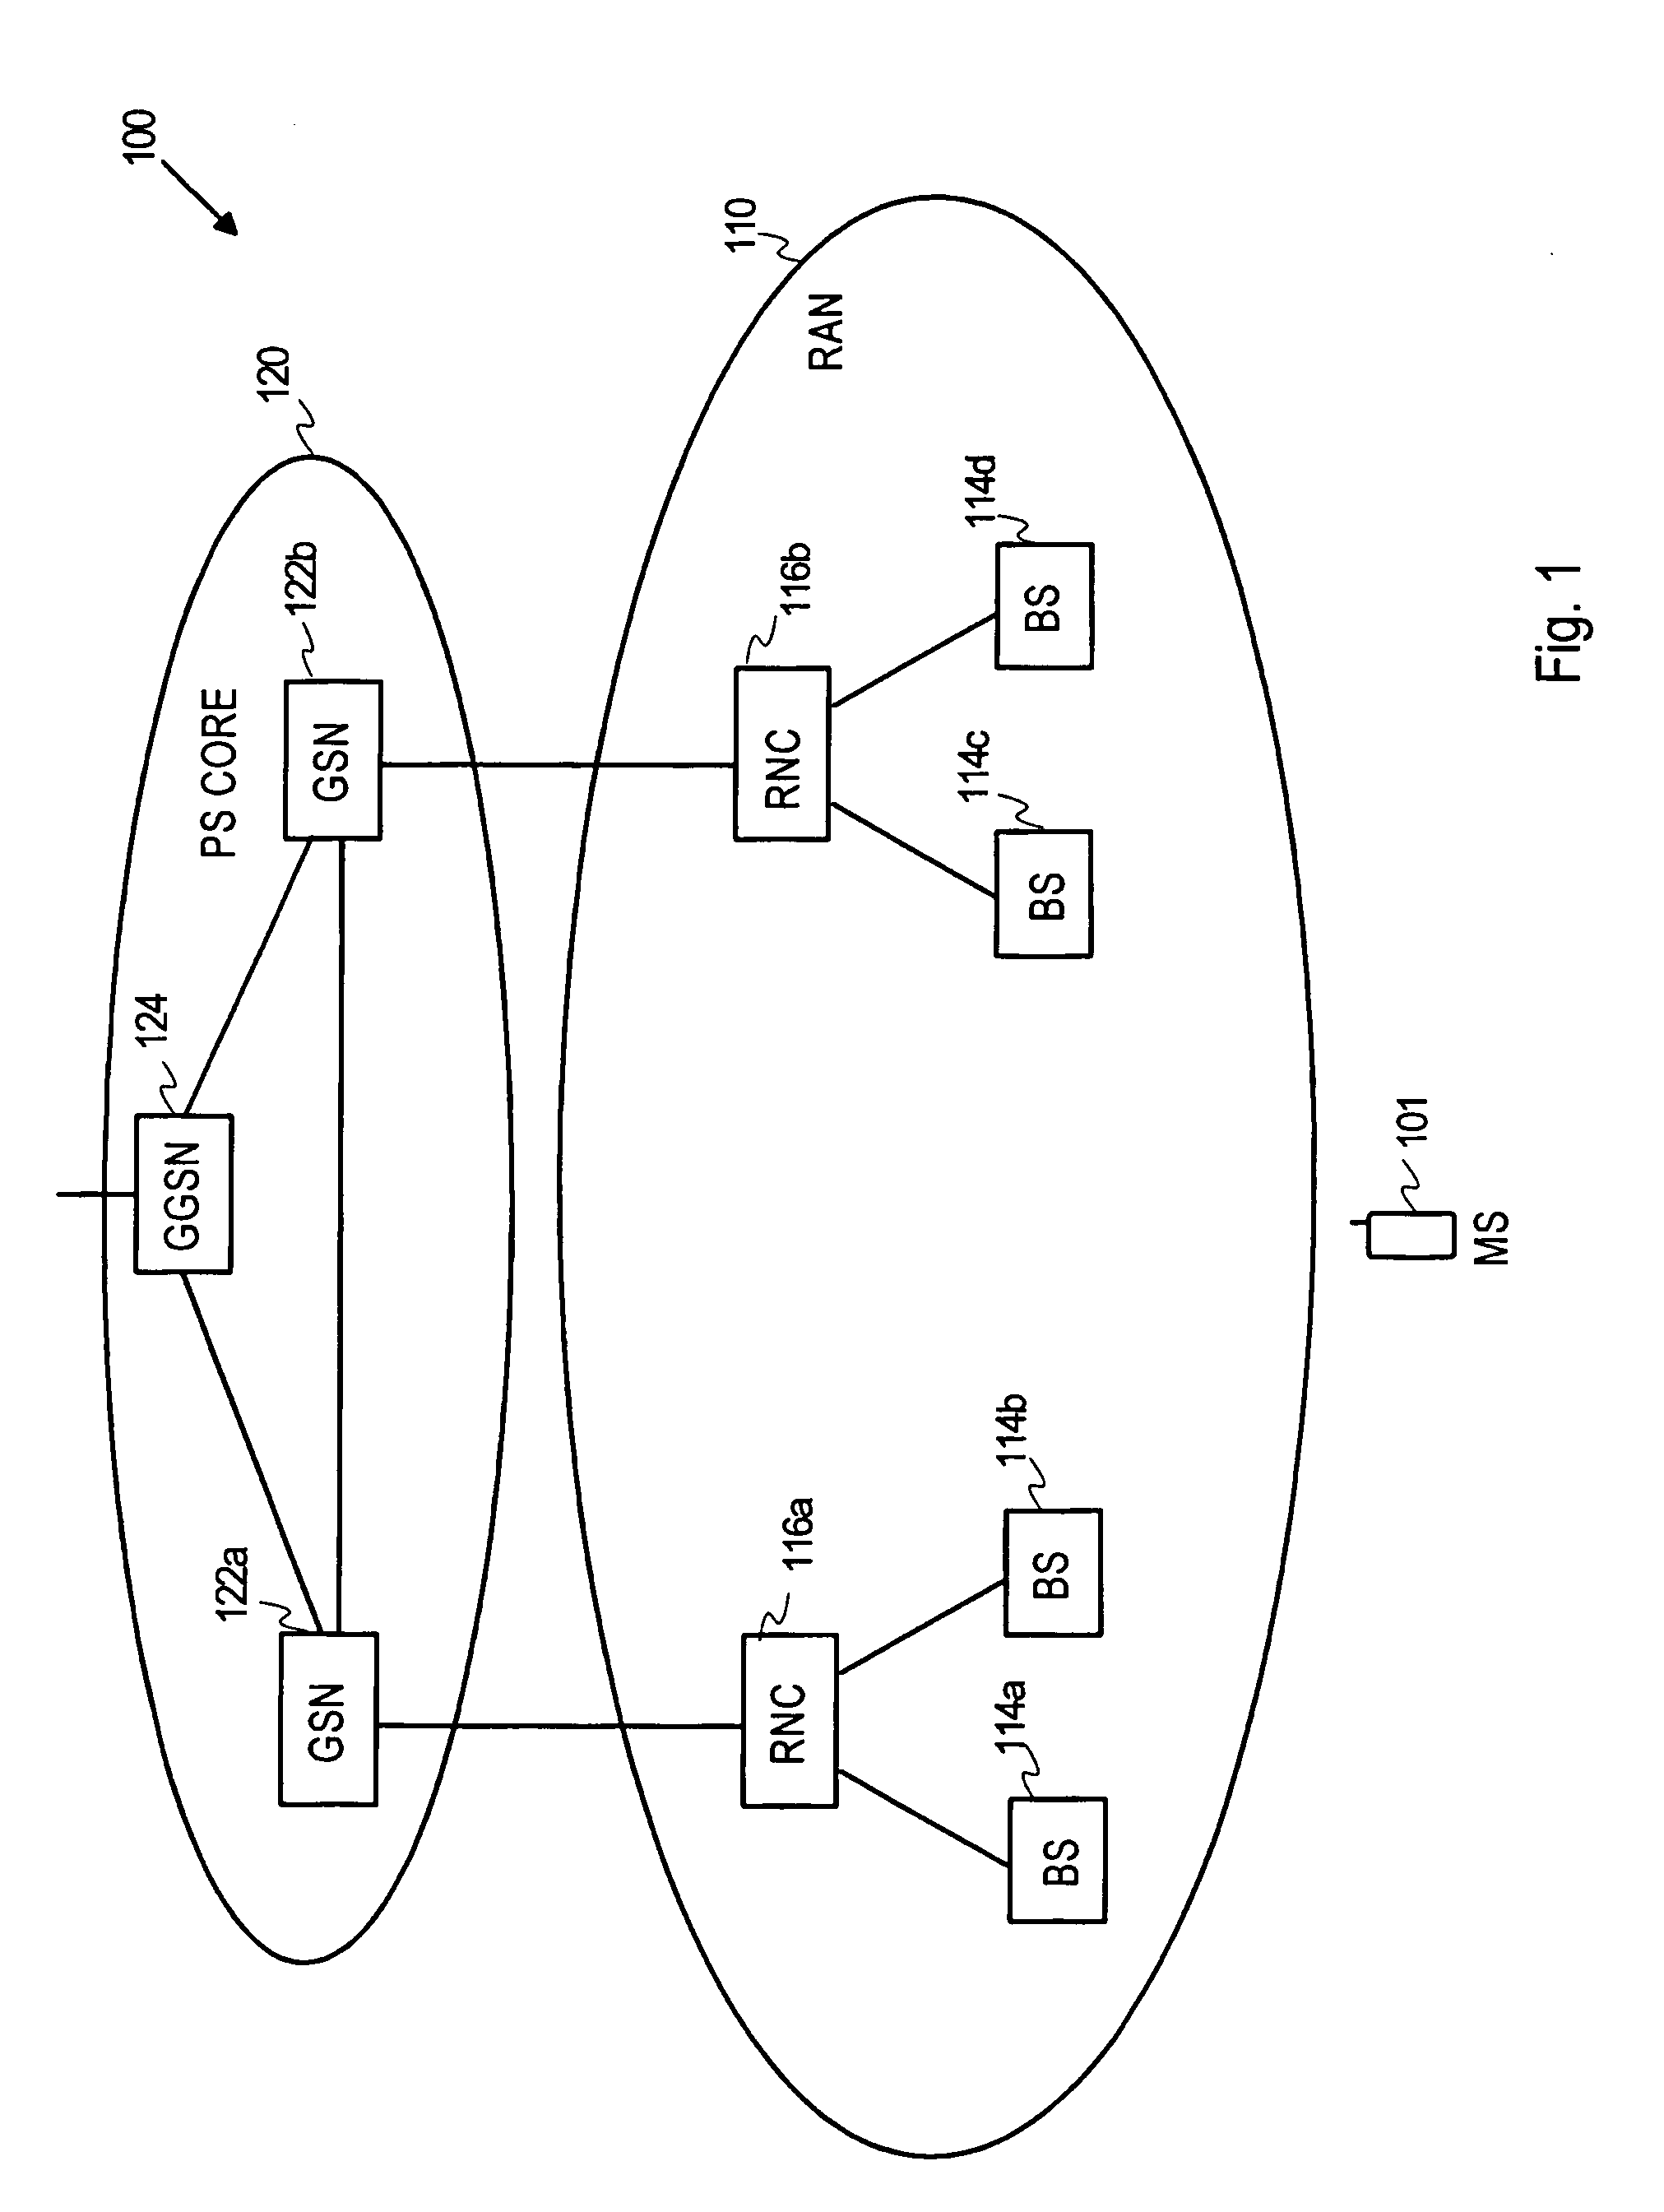 Processing of uplink data in a communications system